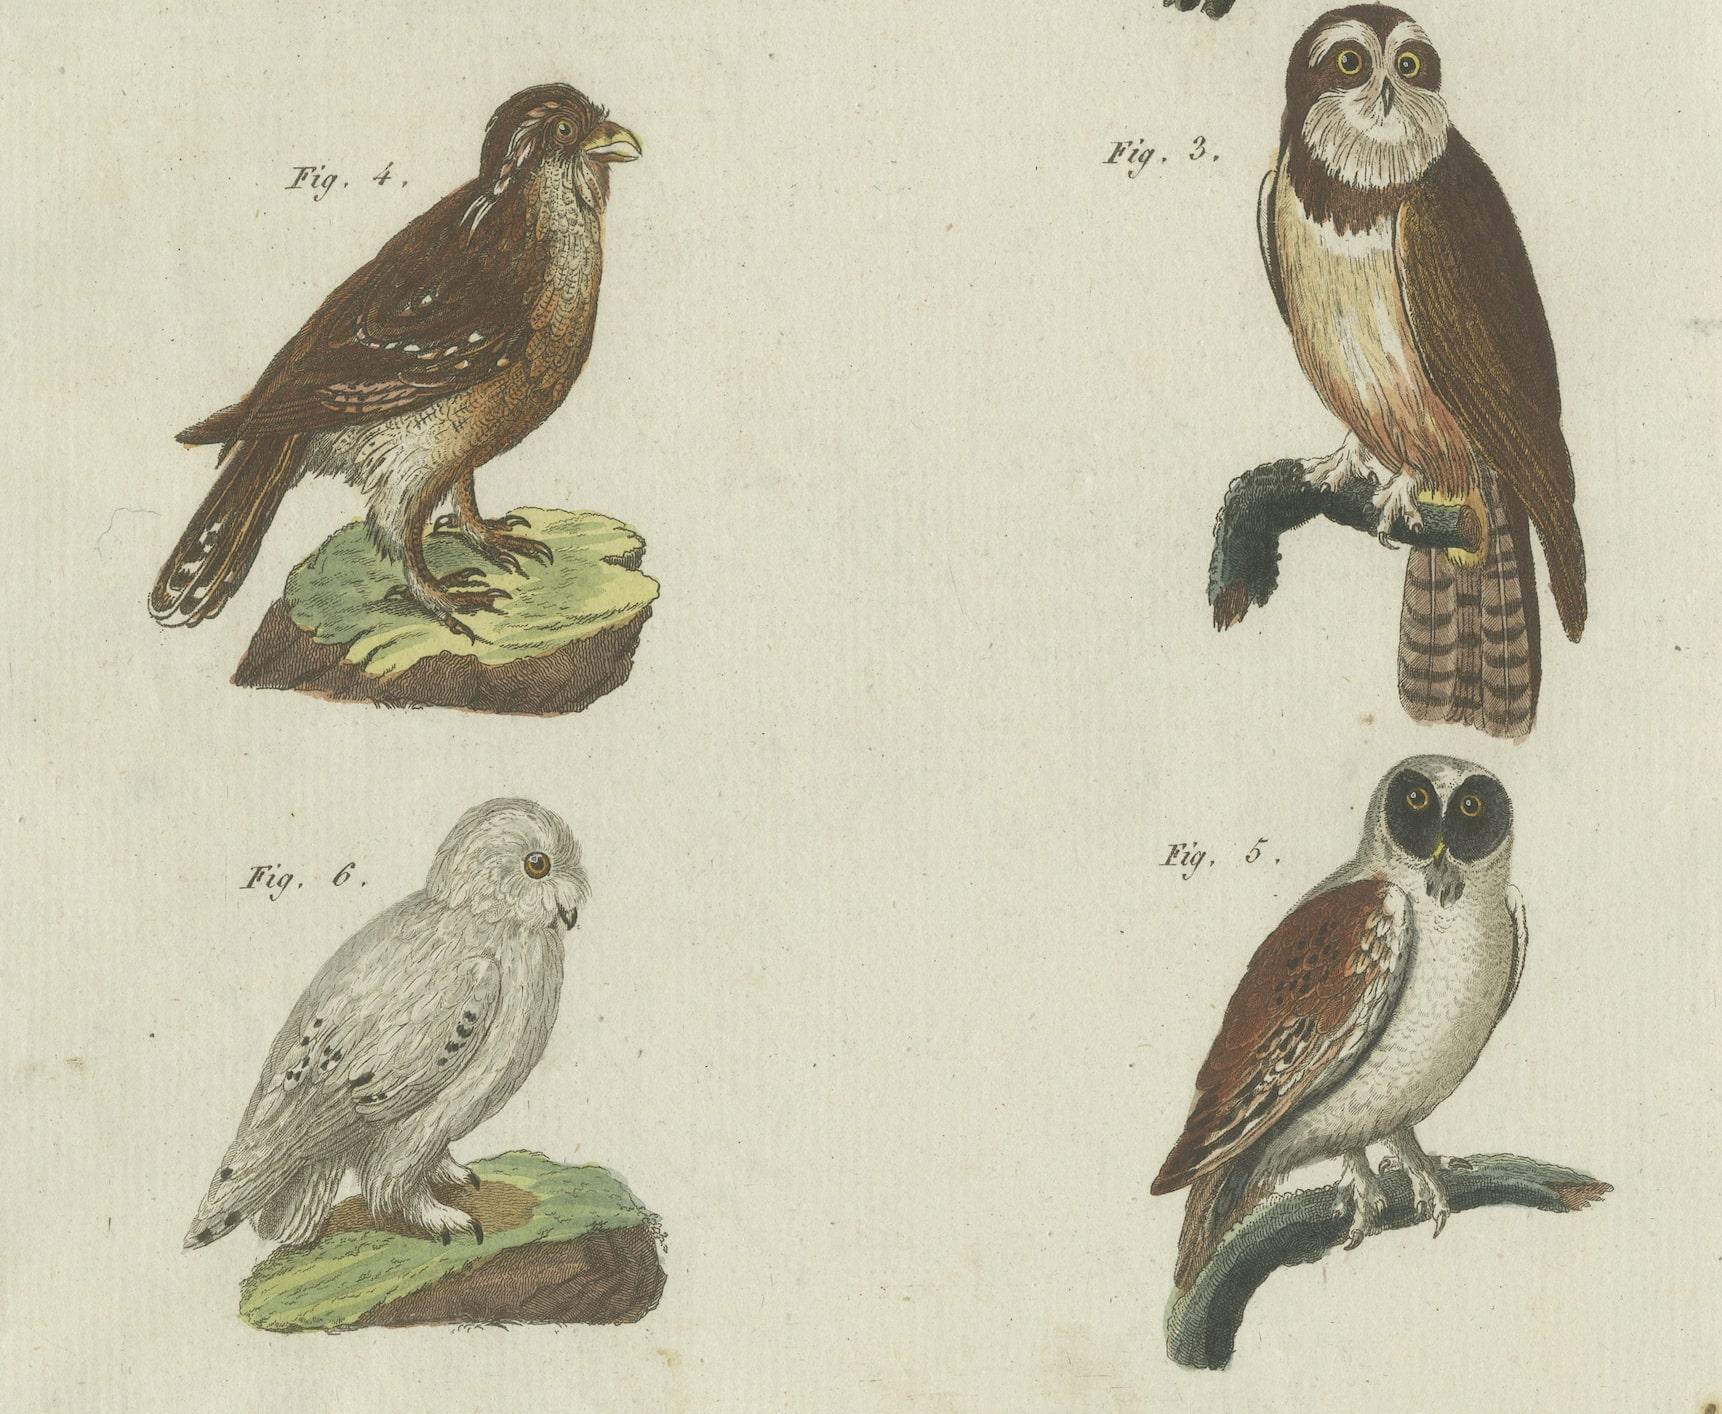 Original antique print of various owls, including the little owl. This print originates from 'Bilderbuch fur Kinder' by F.J. Bertuch. Friedrich Johann Bertuch (1747-1822) was a German publisher and man of arts most famous for his 12-volume